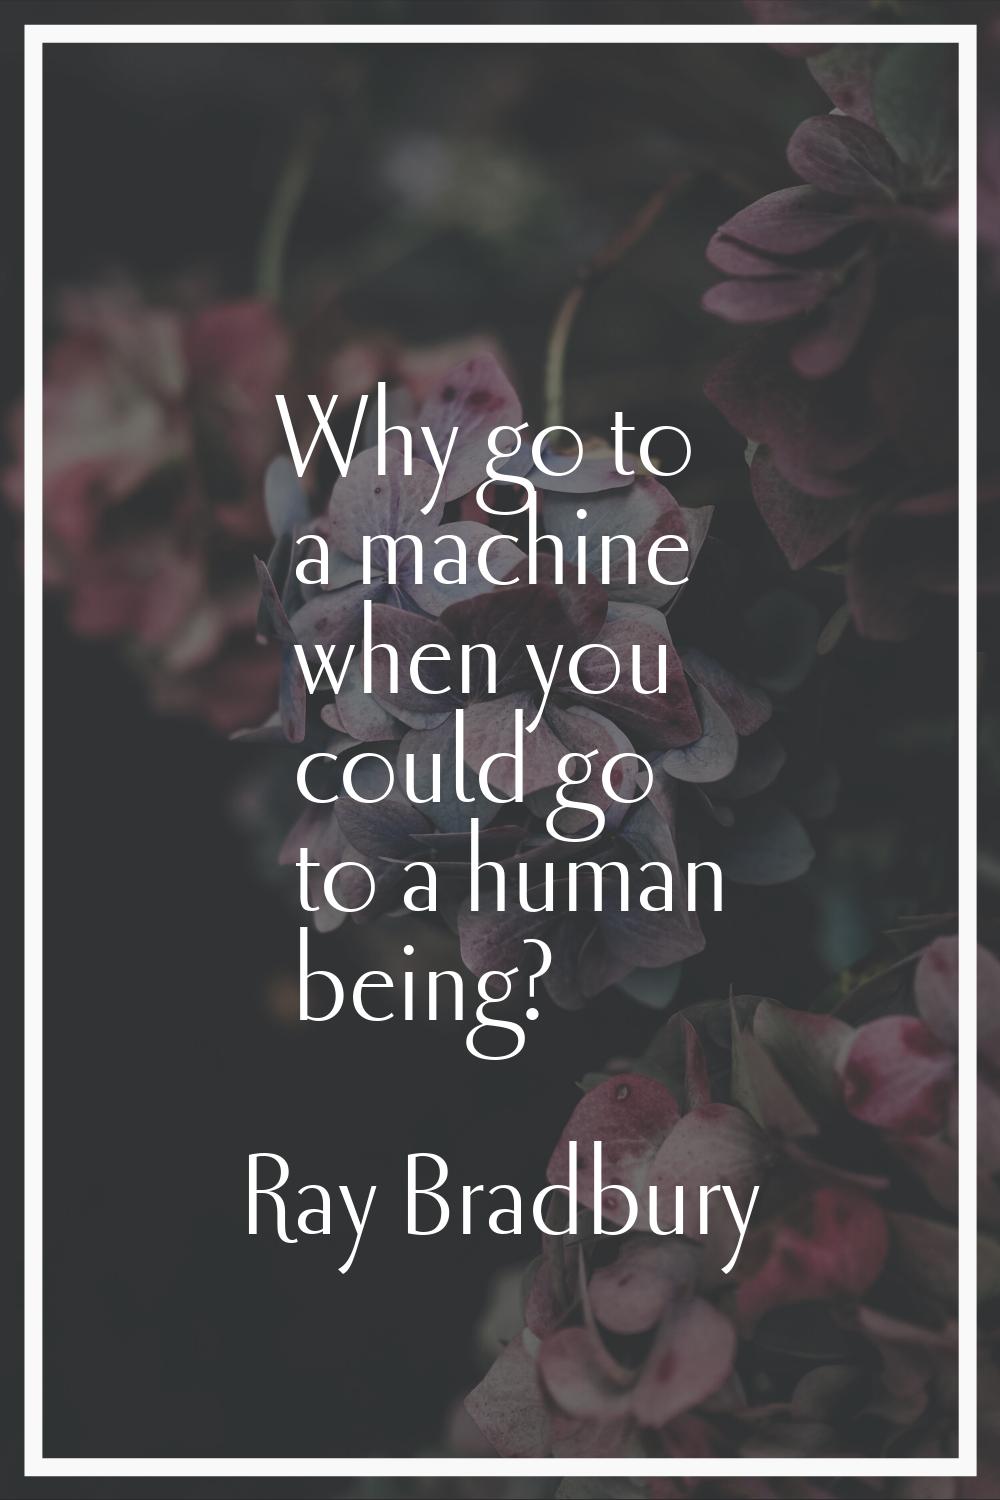 Why go to a machine when you could go to a human being?